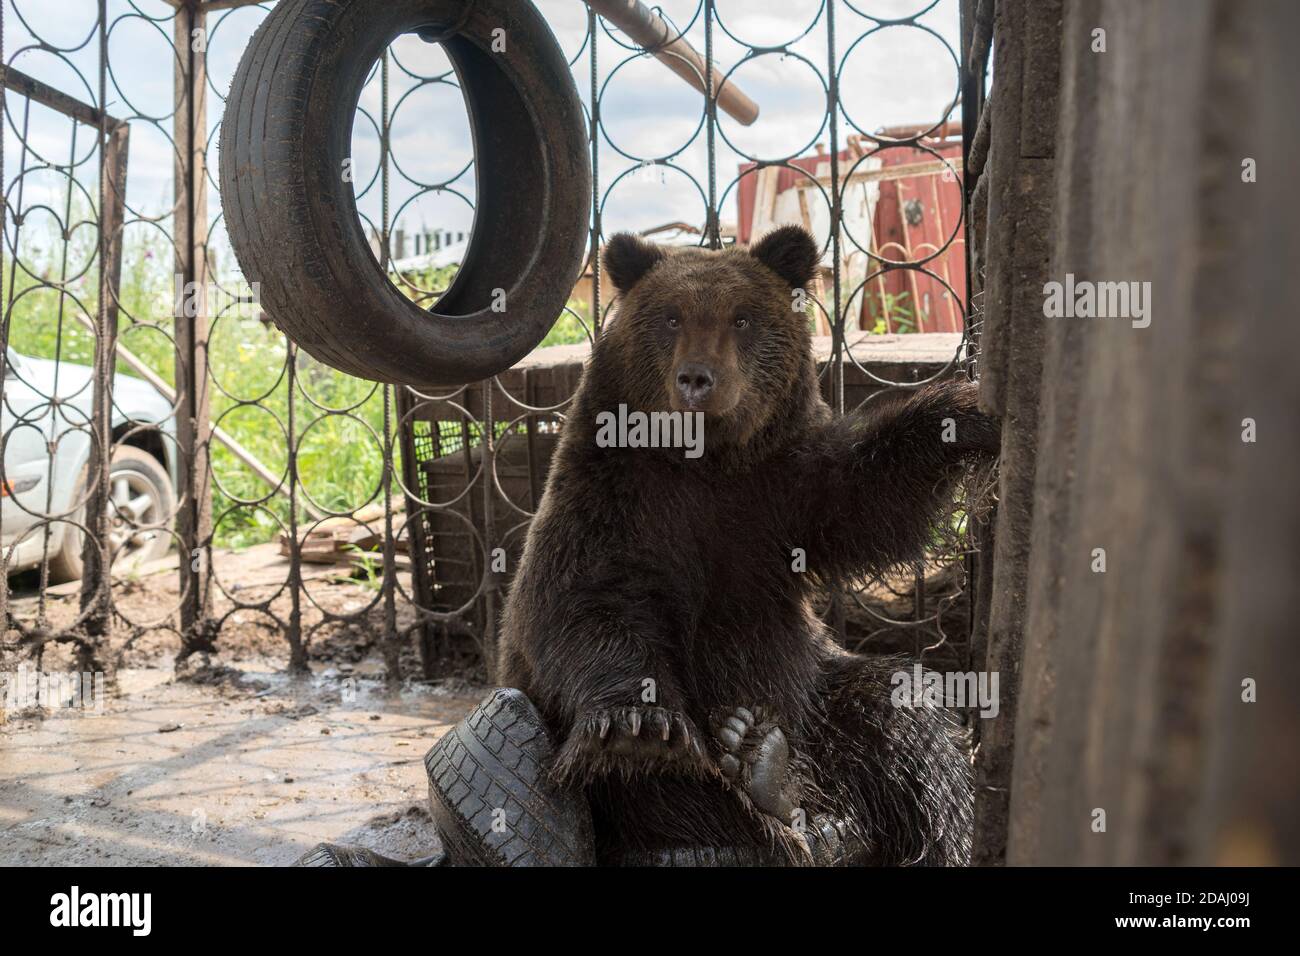 Brown bear cub (Ursus arctos) is sitting  in a iron cage on automobile tires and looking straight. Stock Photo